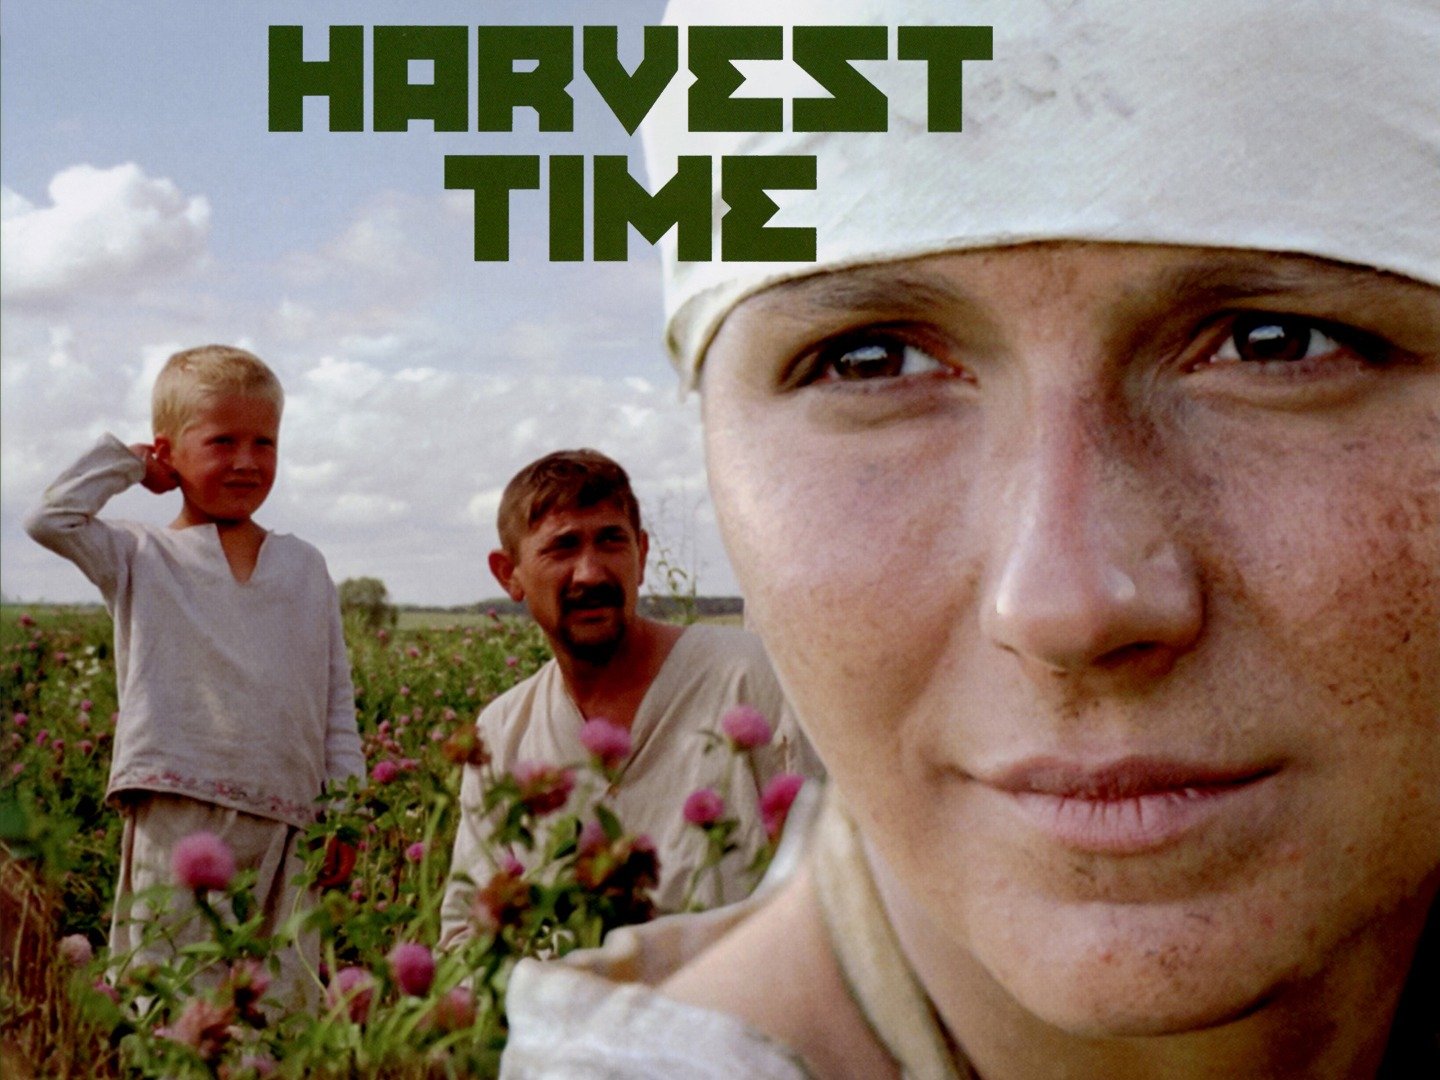 harvest time movie review